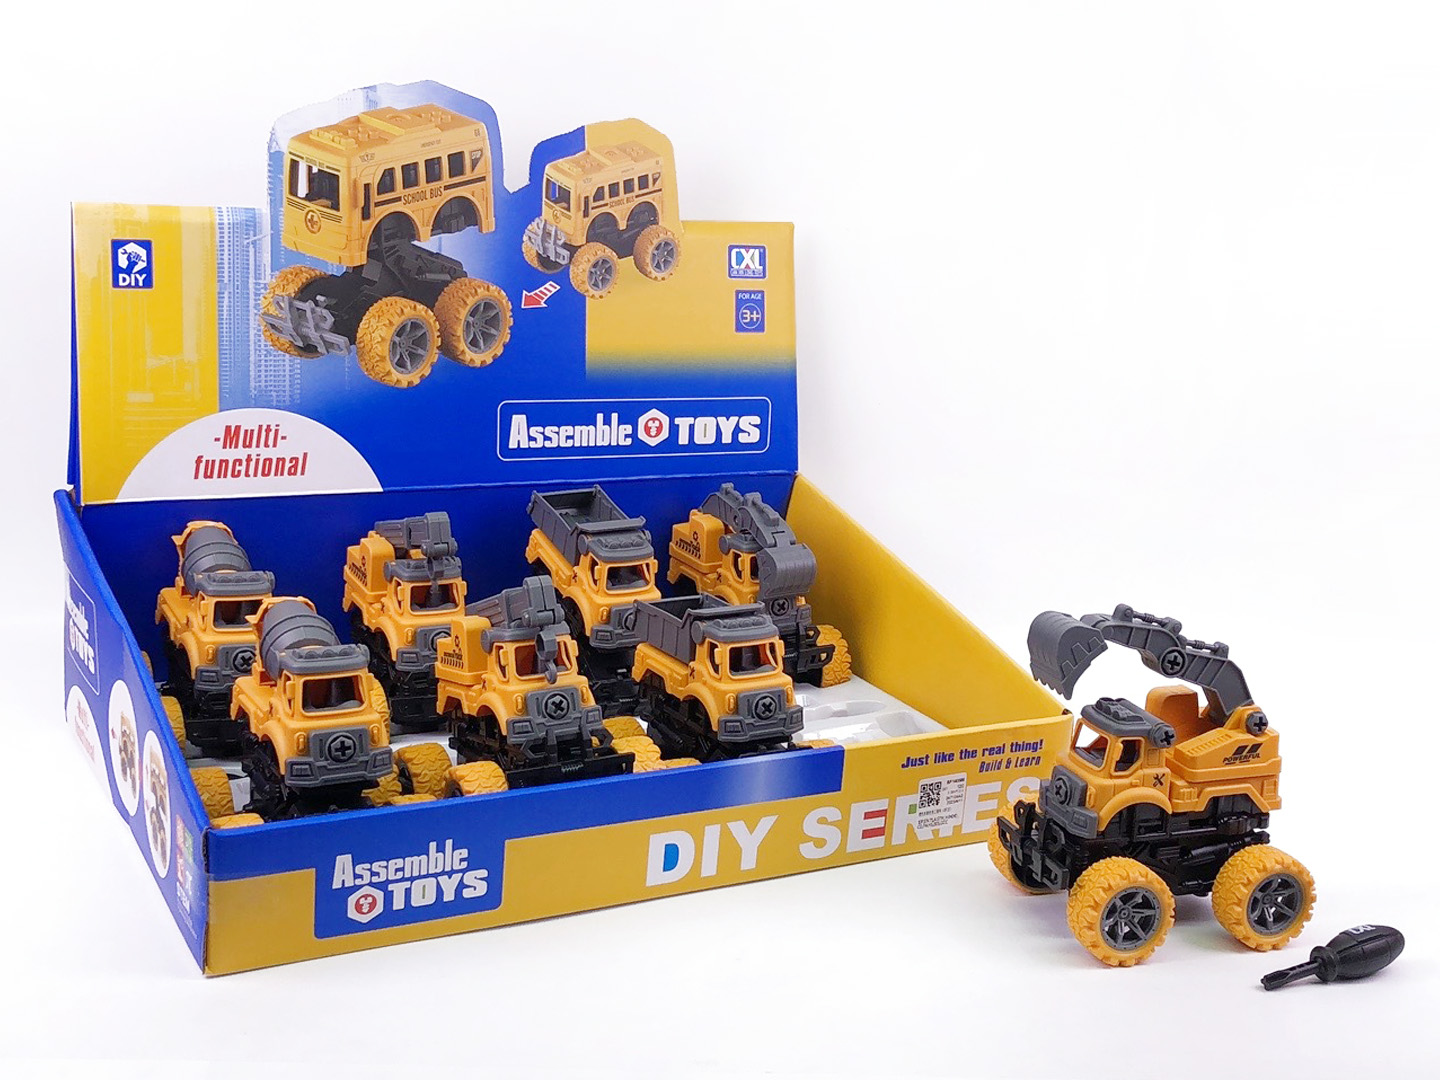 Friction Diy Transforms Construction Truck(8in1) toys